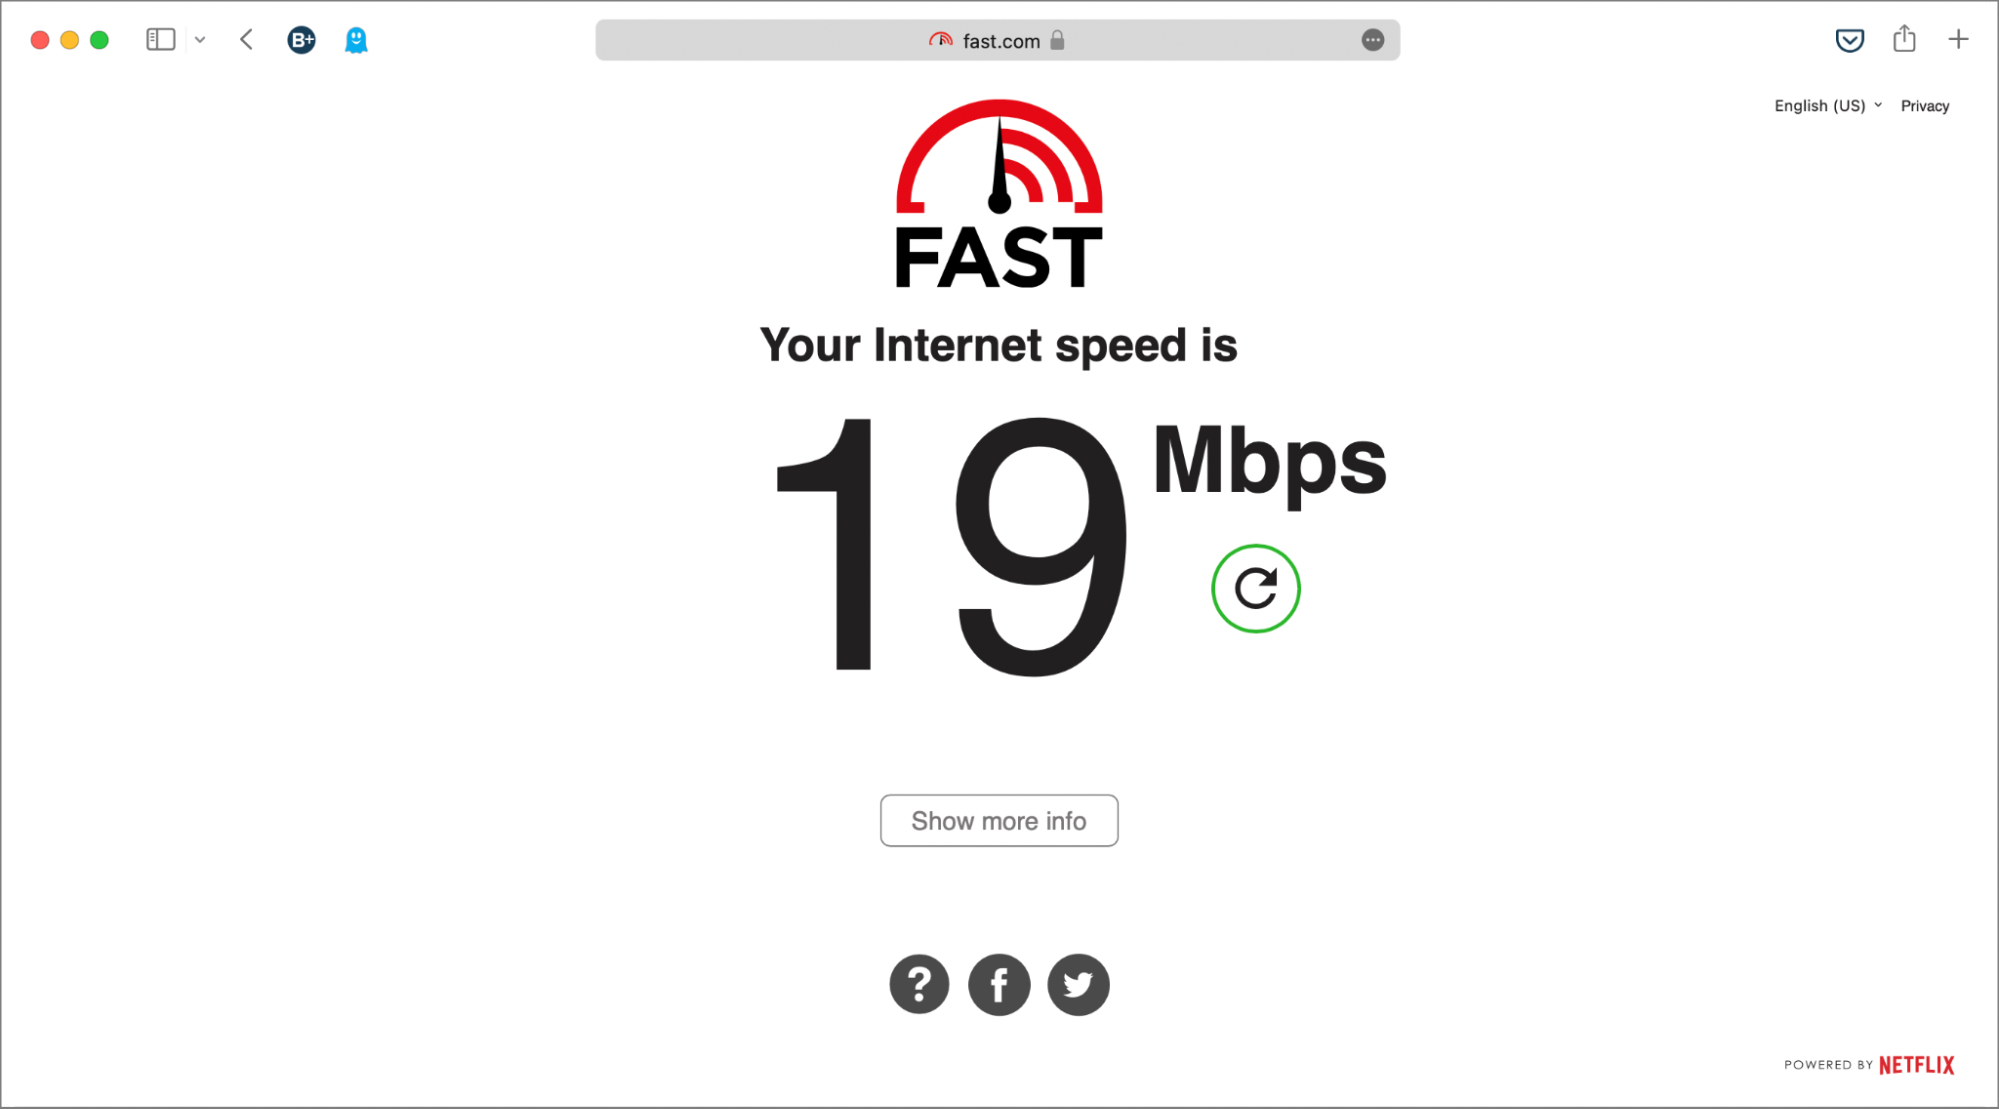 A screenshot that shows the website to check internet speed in Safari